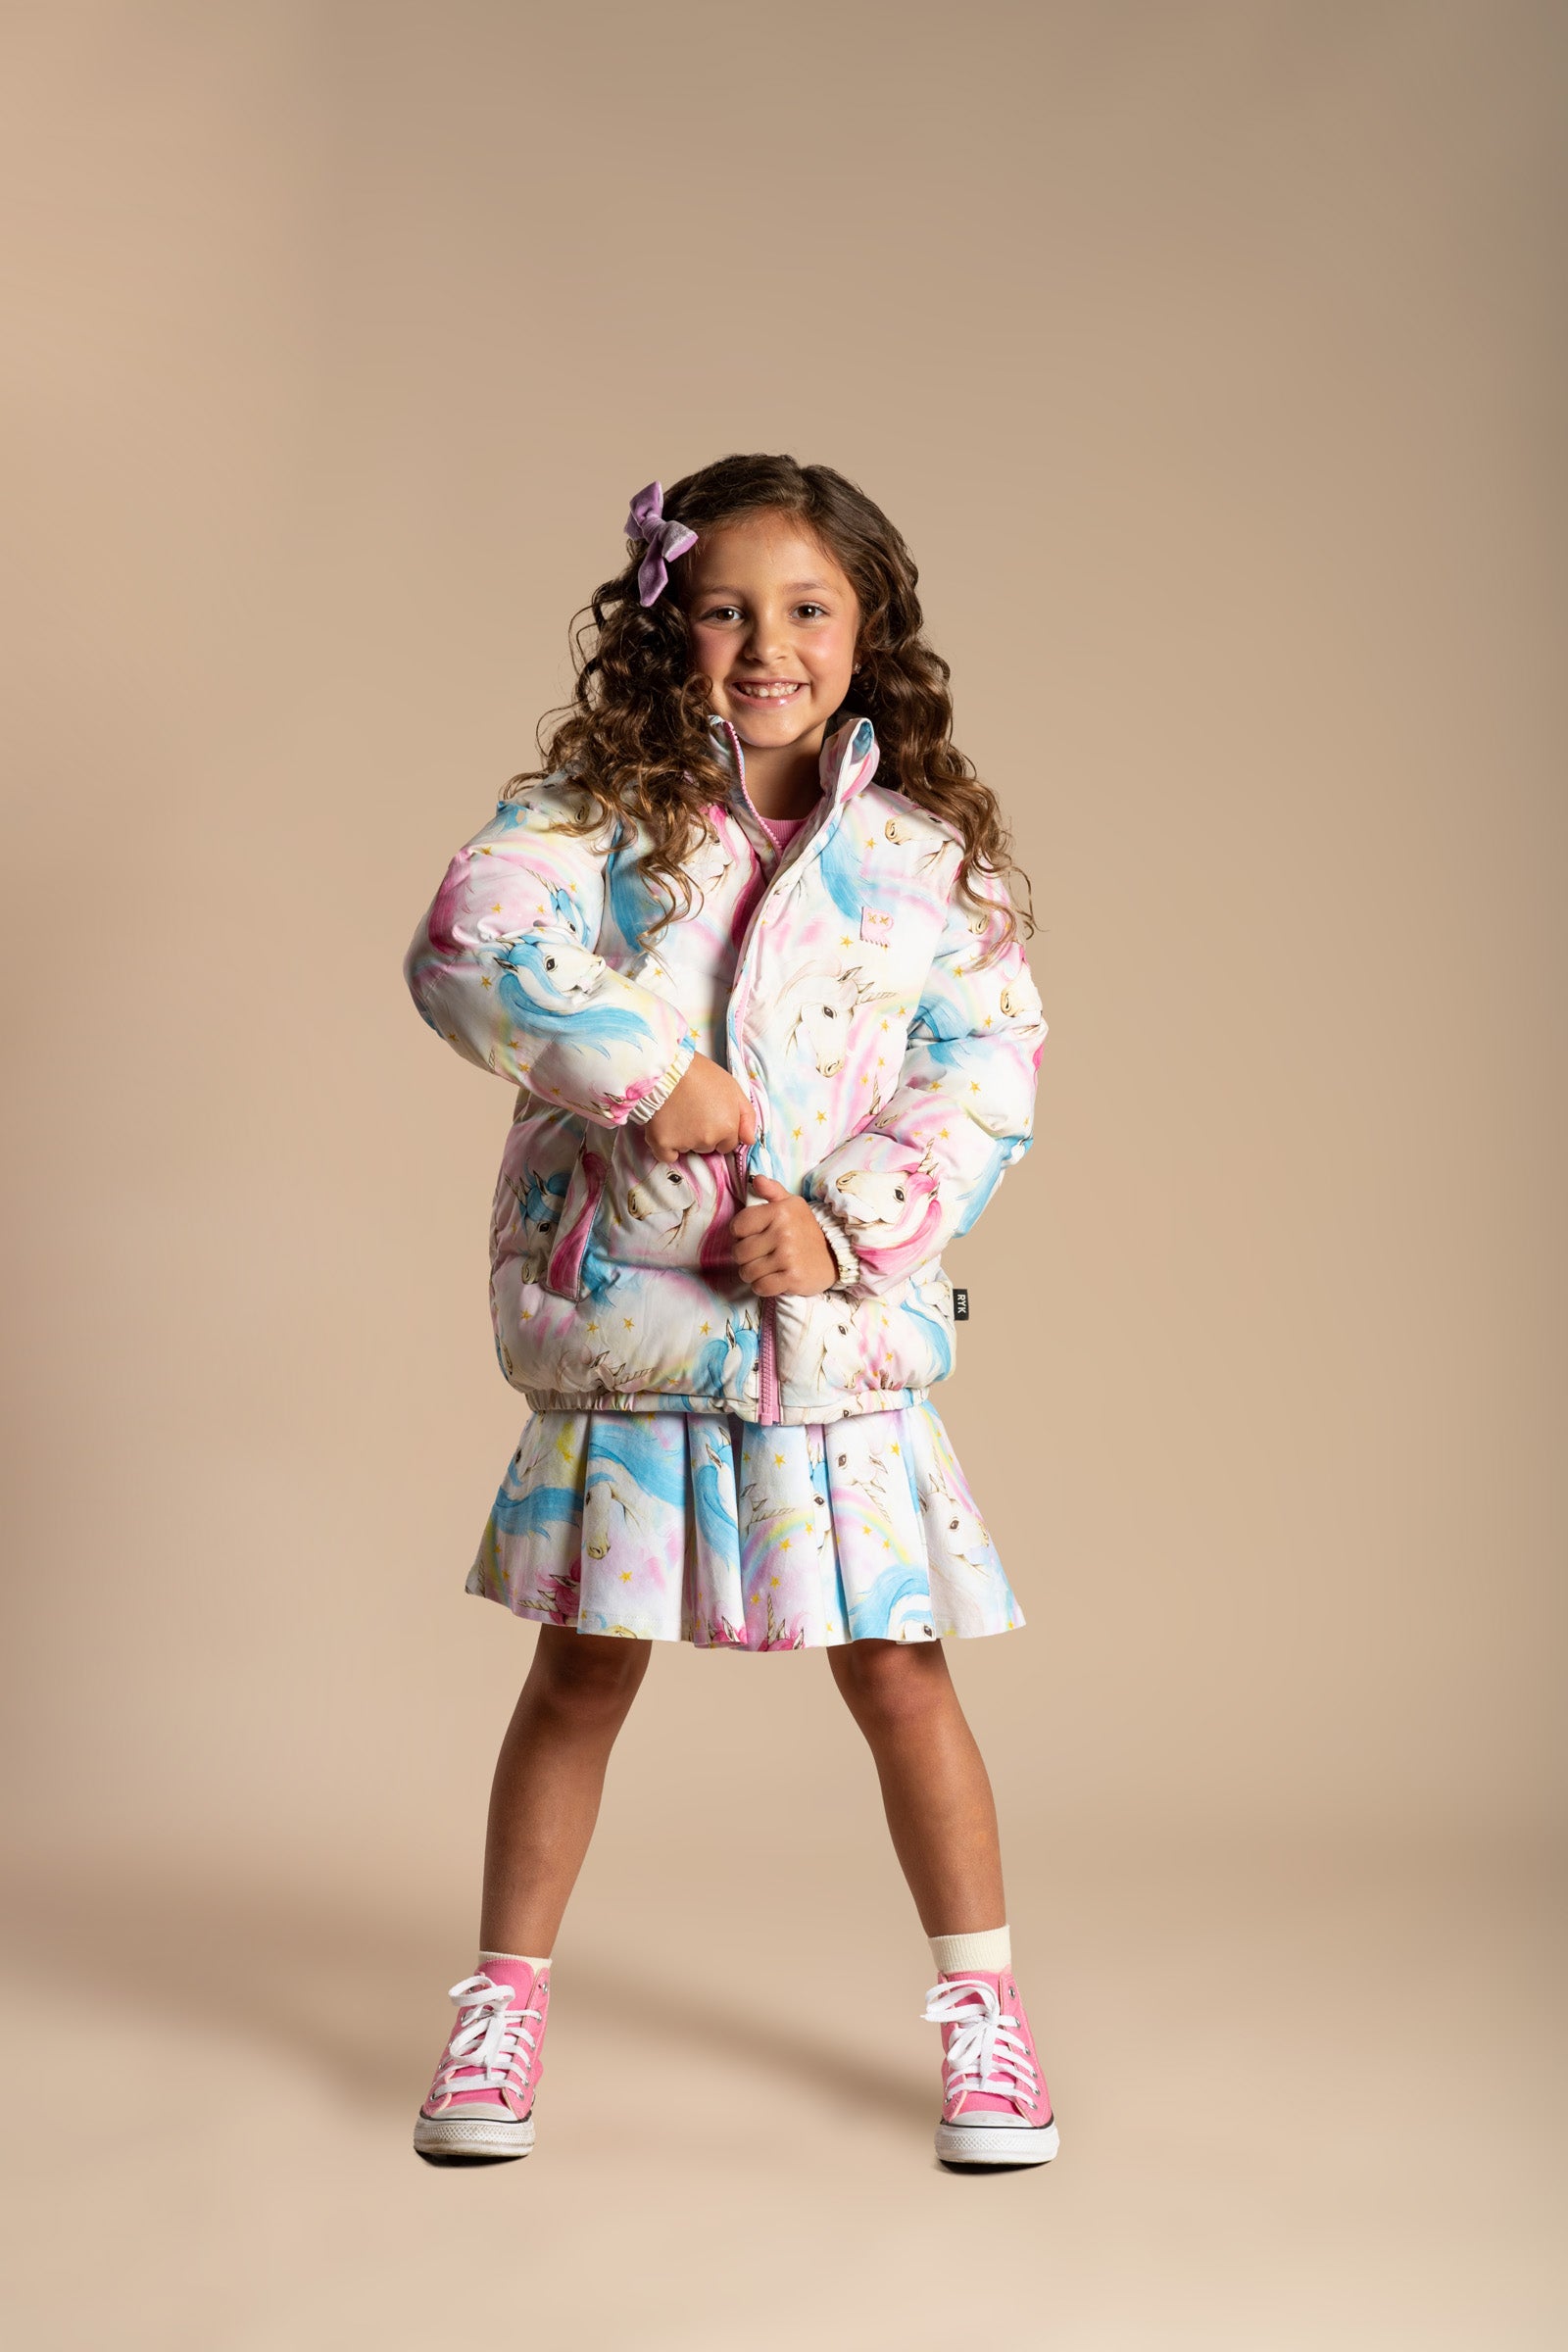 Rock Your Baby - Fantasia Puff Padded Jacket with Lining